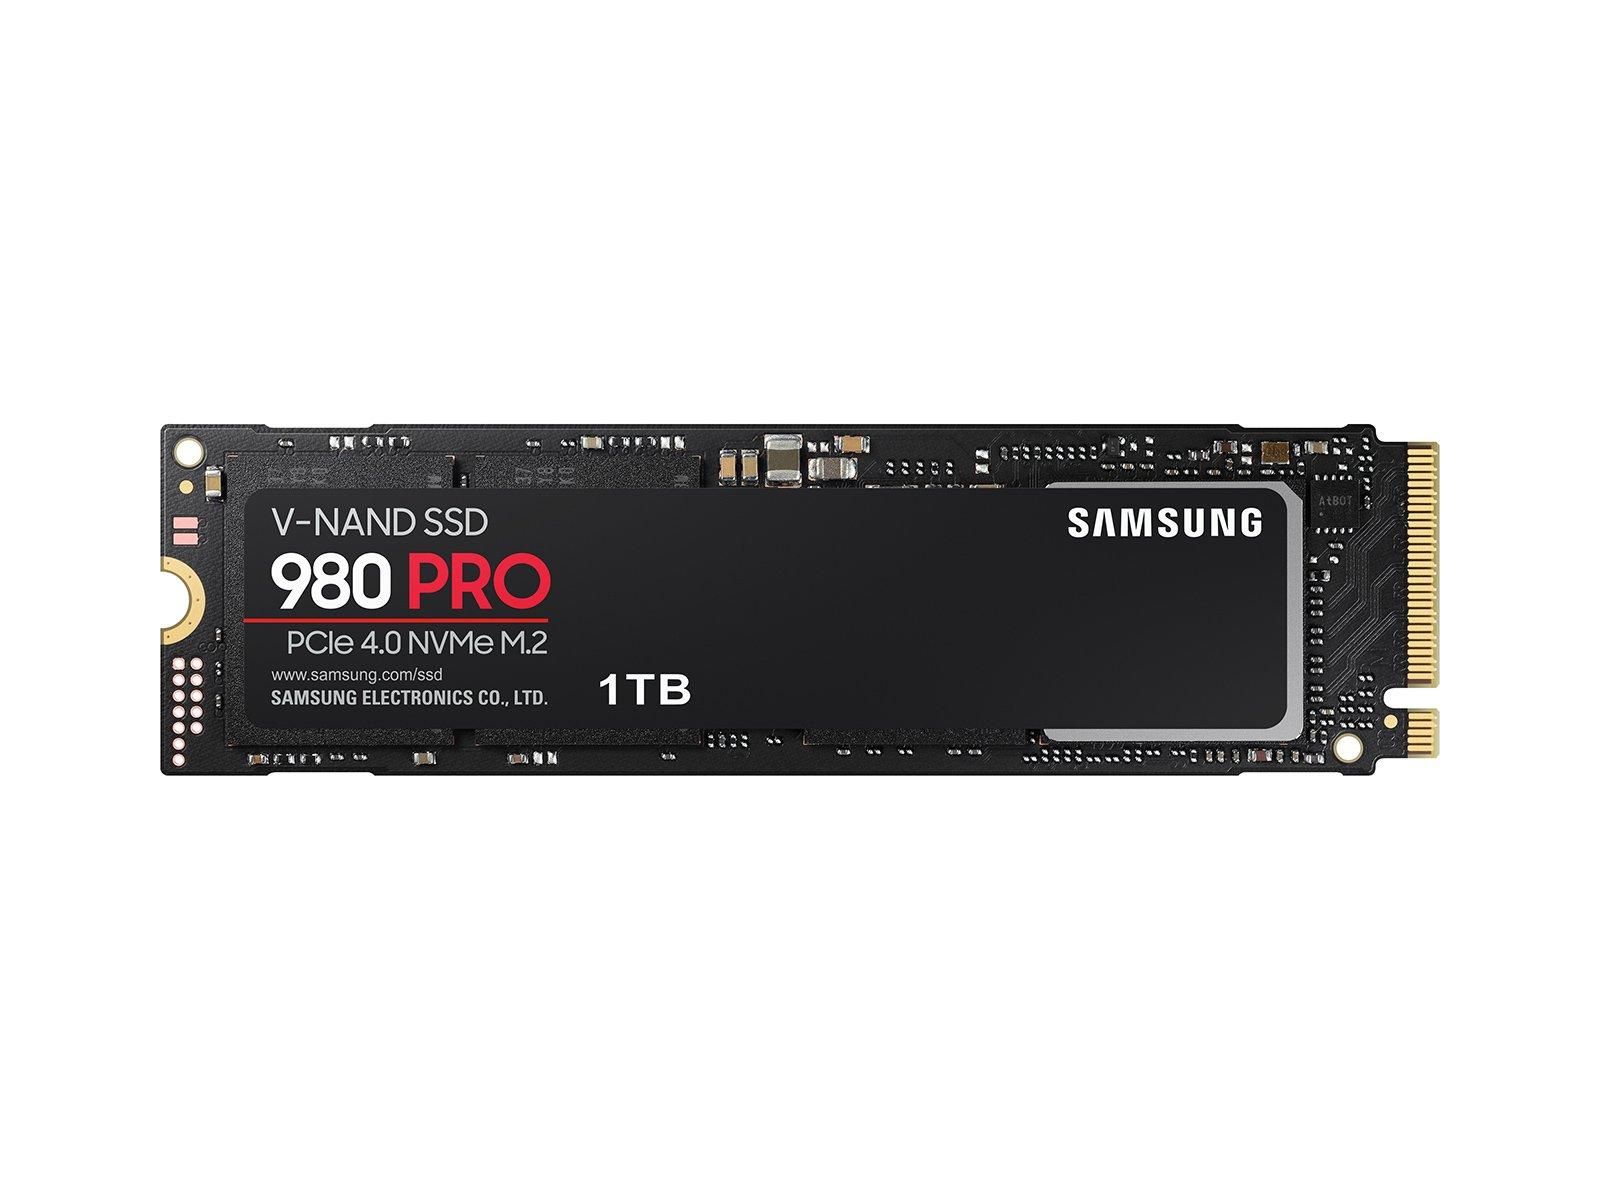 Samsung 980 PRO PCIe 4.0 NVMe M.2 Internal V-NAND Solid State Drive 1TB